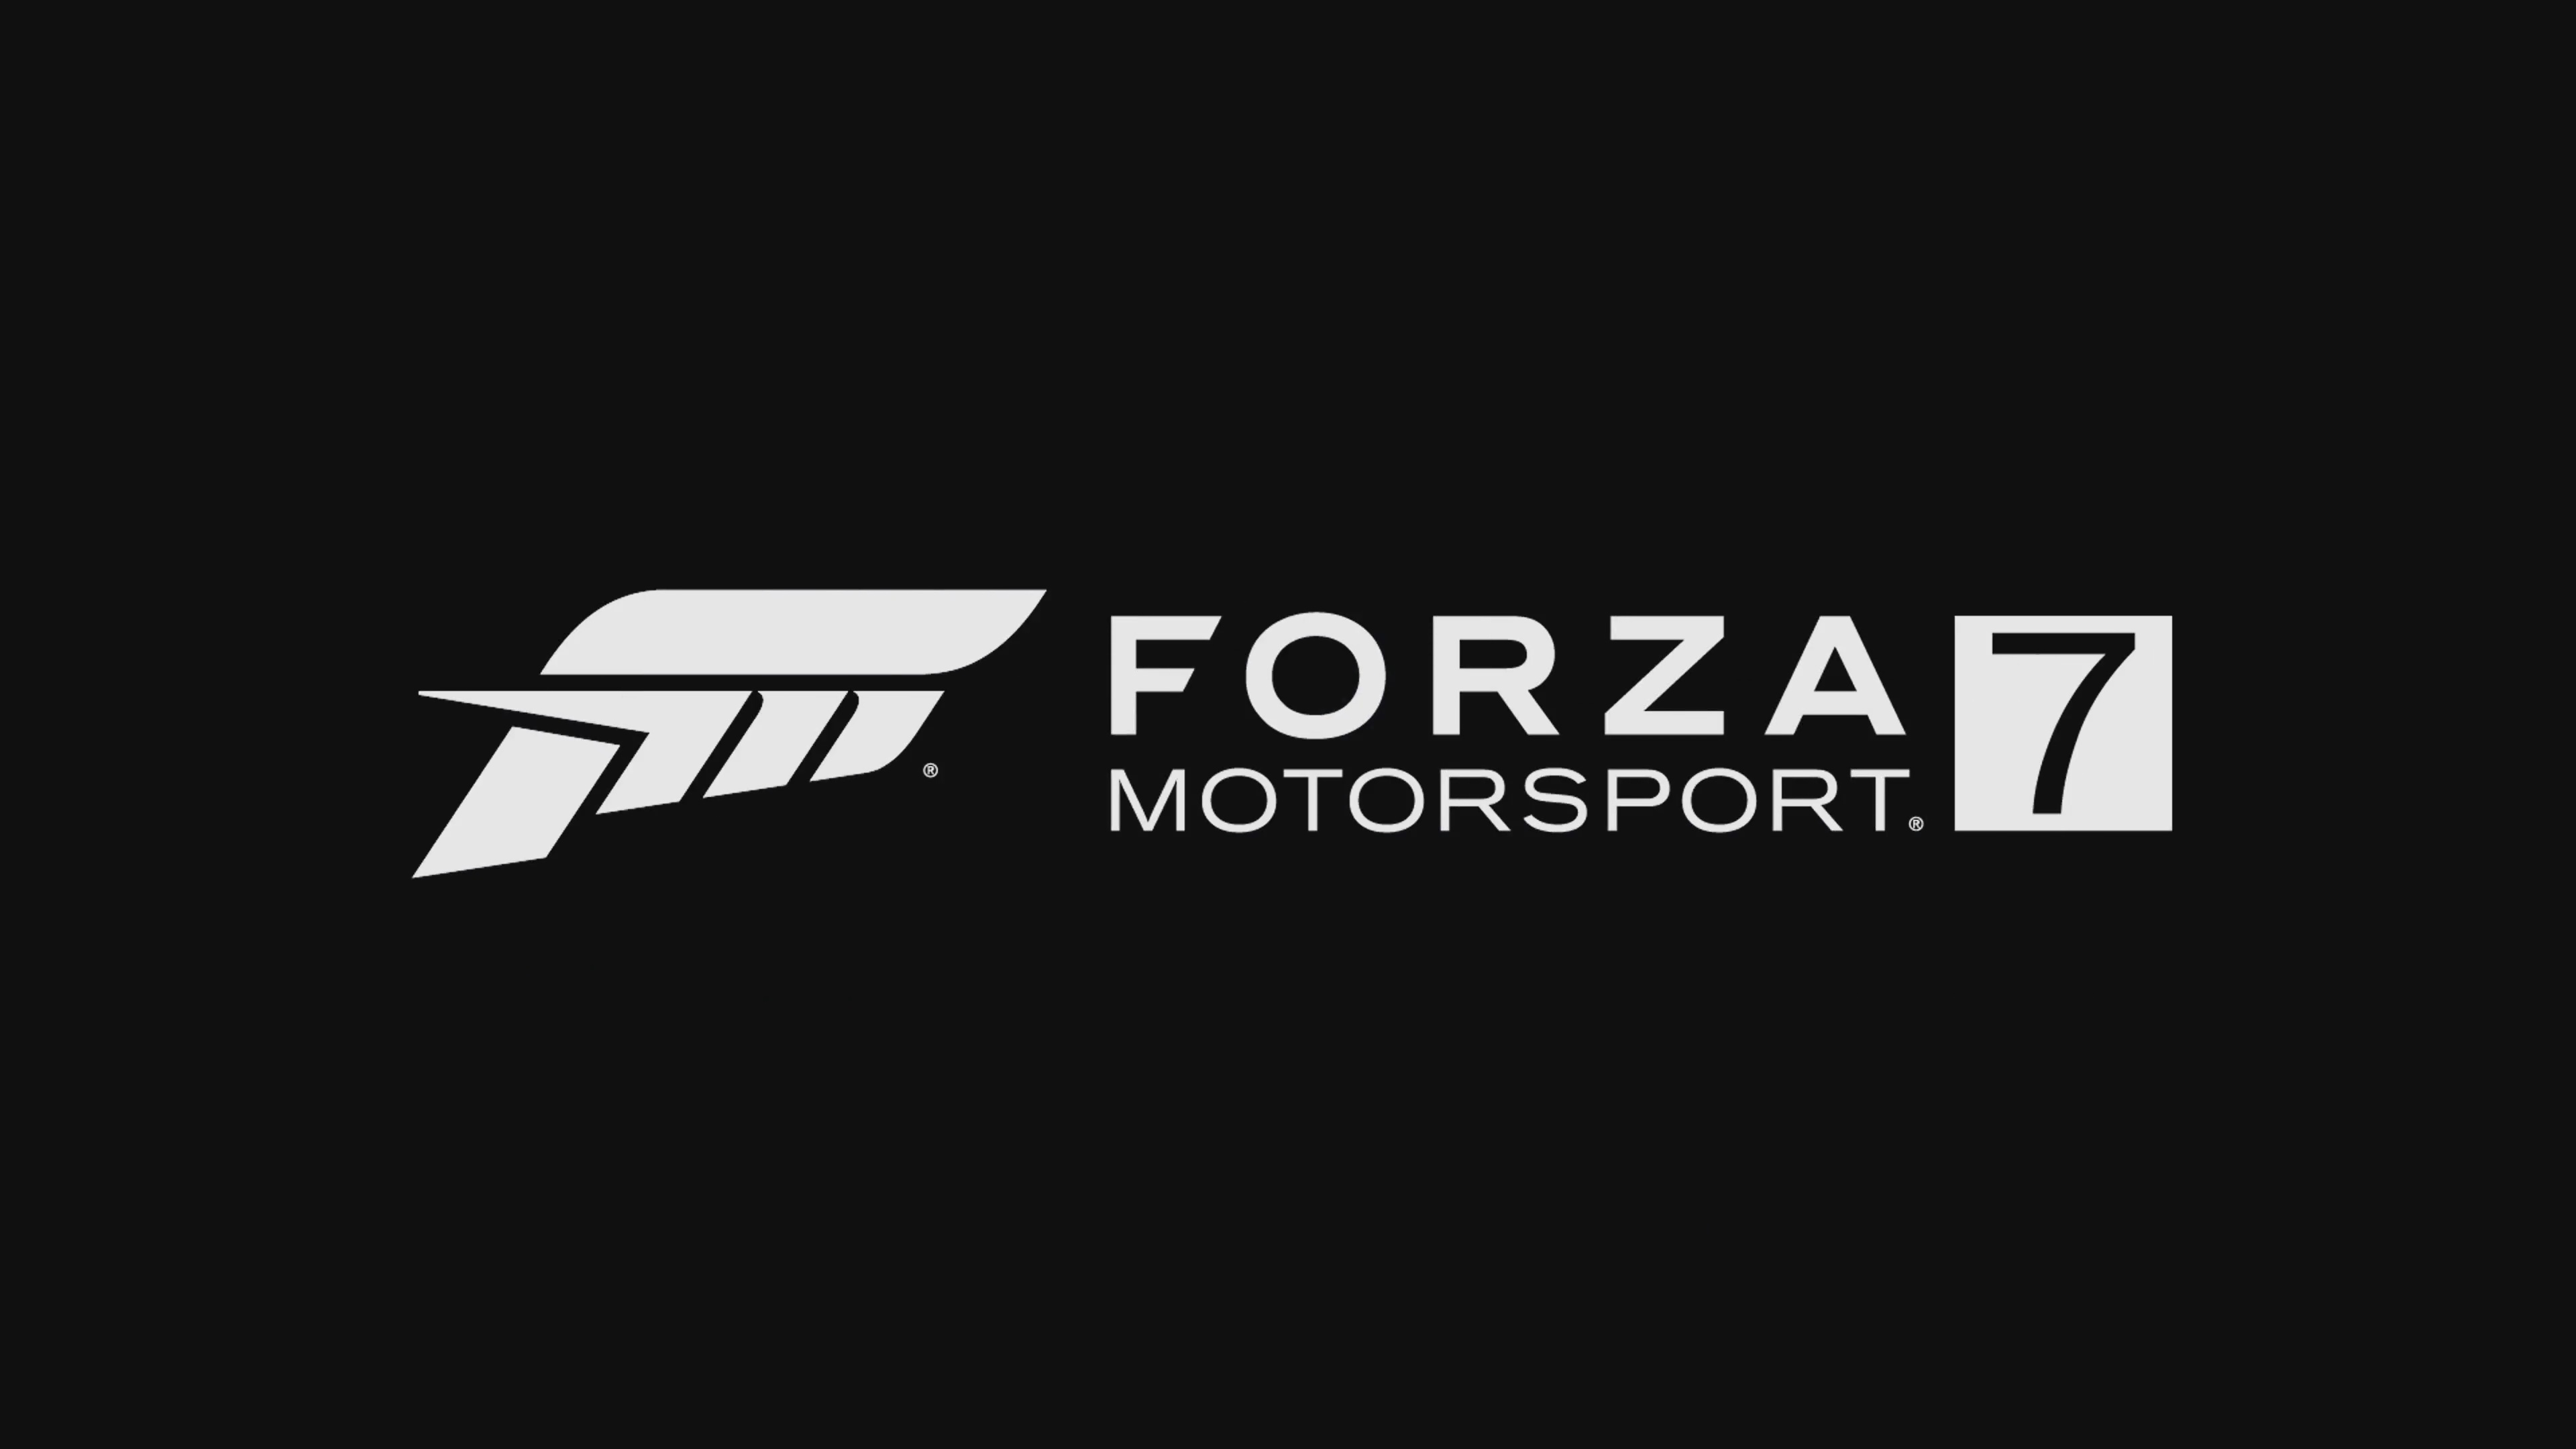 Video Game Forza Motorsport 7 HD Wallpaper | Background Image